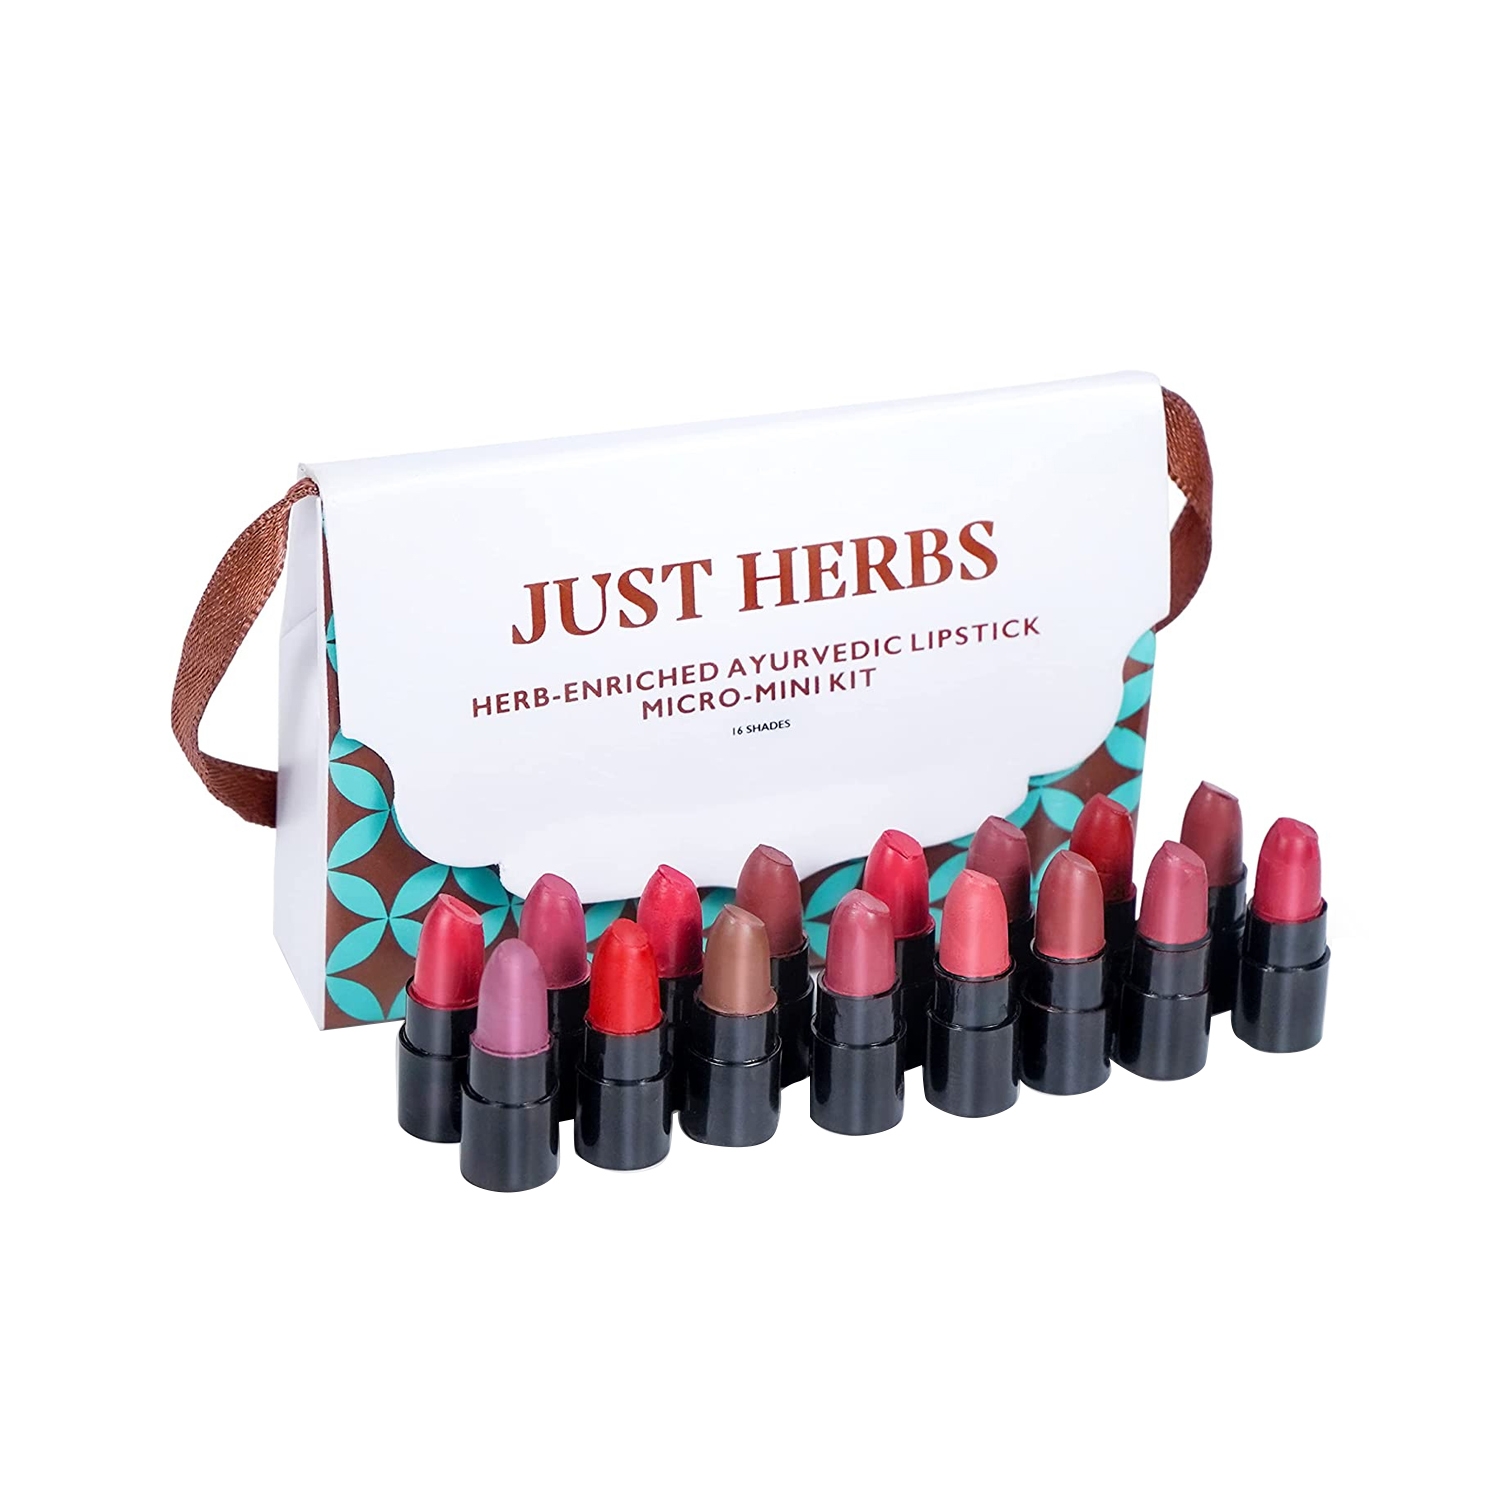 Just Herbs | Just Herbs Herb Enriched Ayurvedic Lipstick Micro-Mini Kit - Multi-Color (16 Pcs)